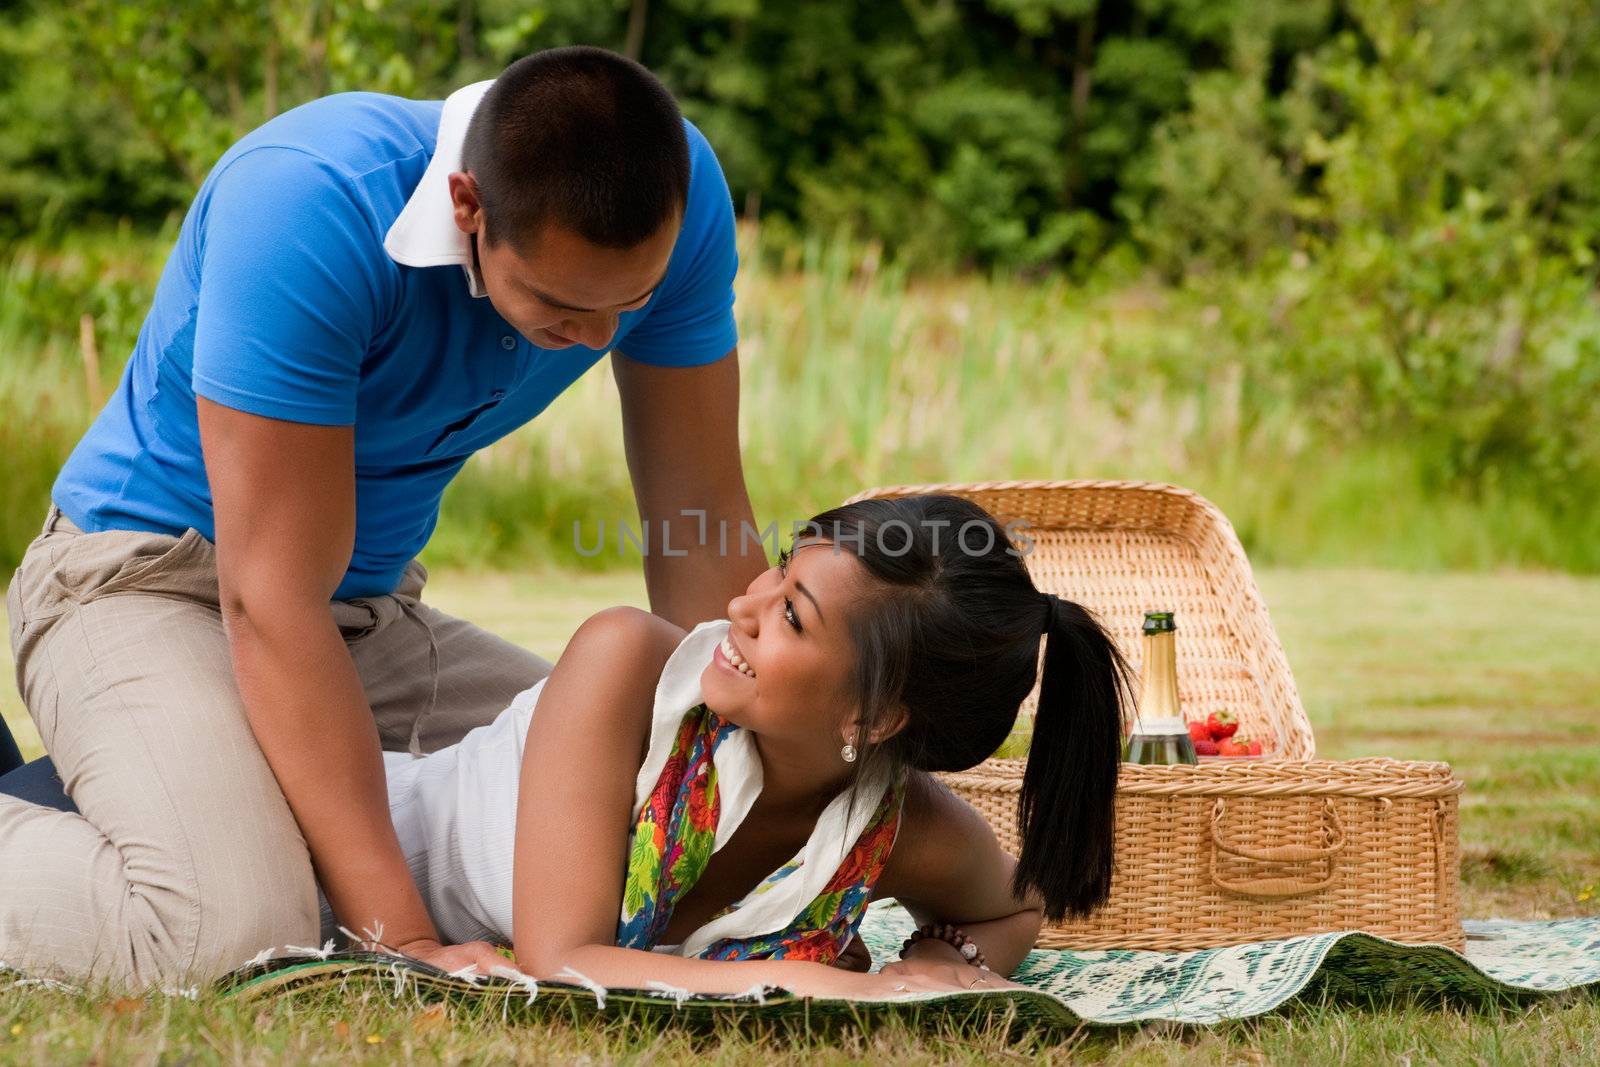 Sweet picnic couple by DNFStyle